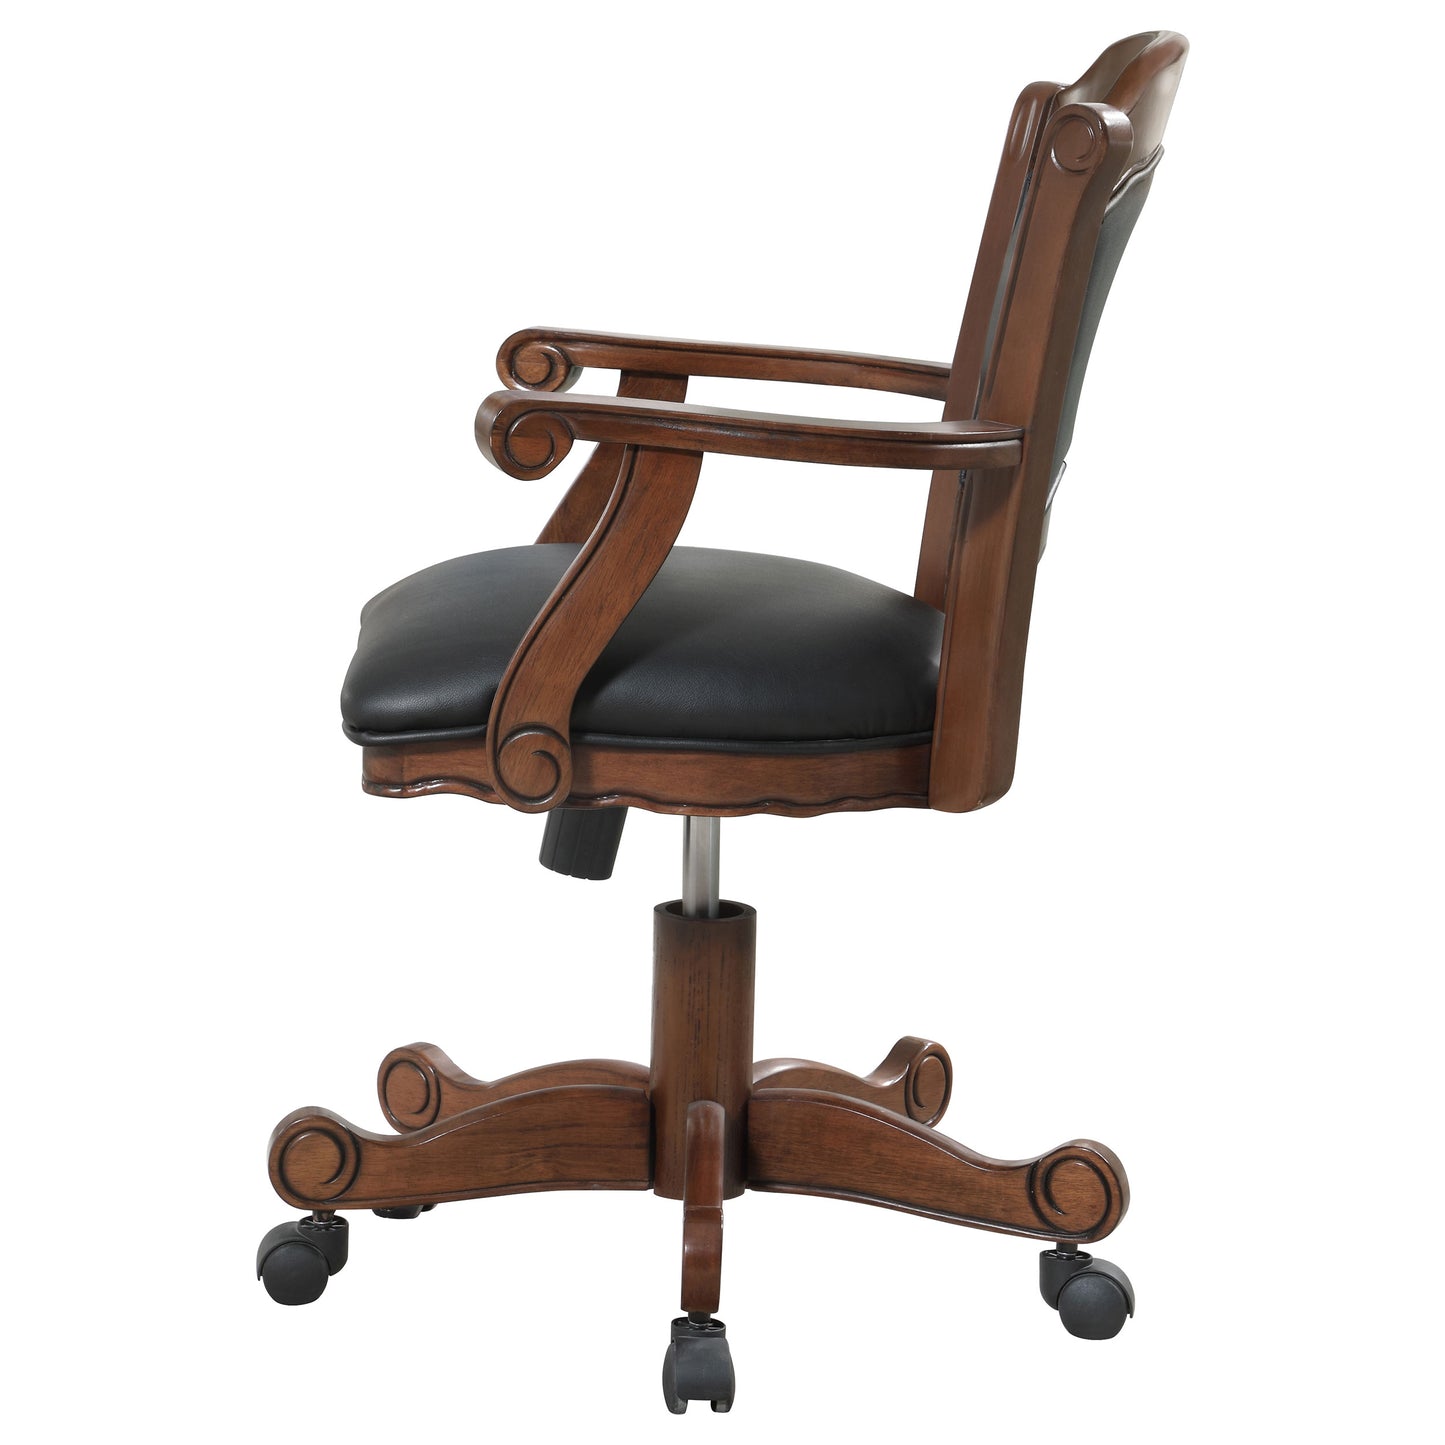 Turk Game Chair with Casters Black and Tobacco